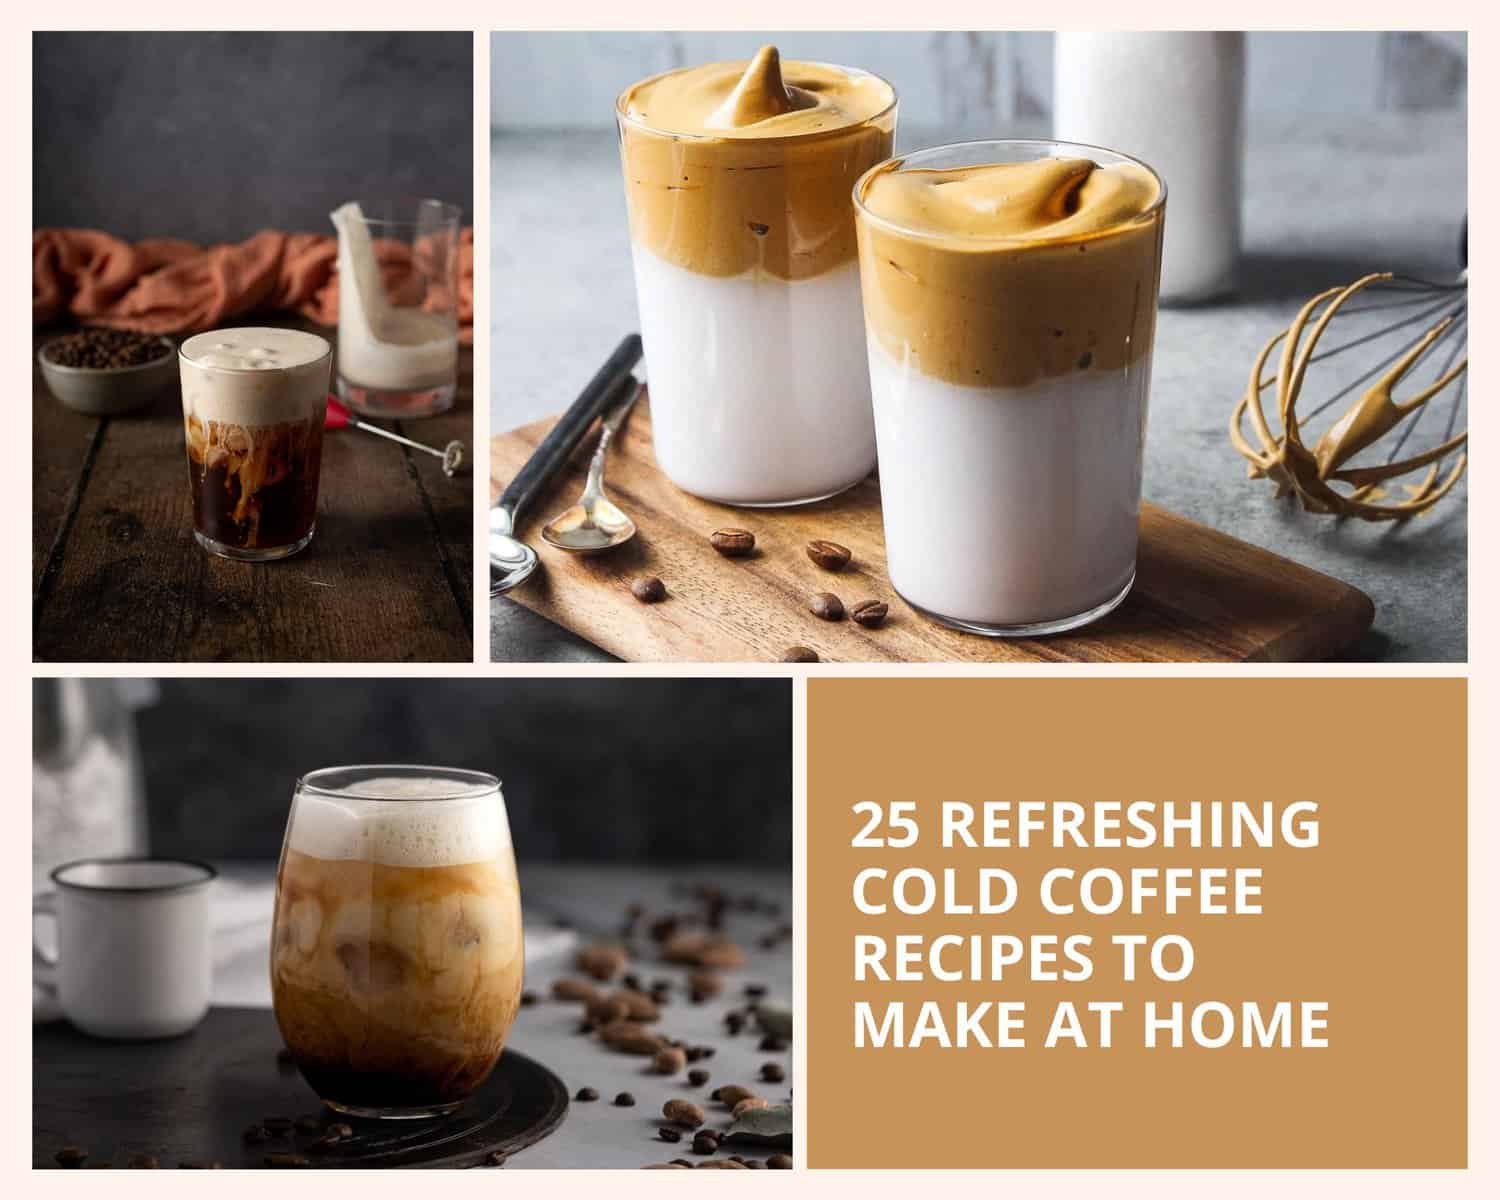 collage image of cold coffee drinks